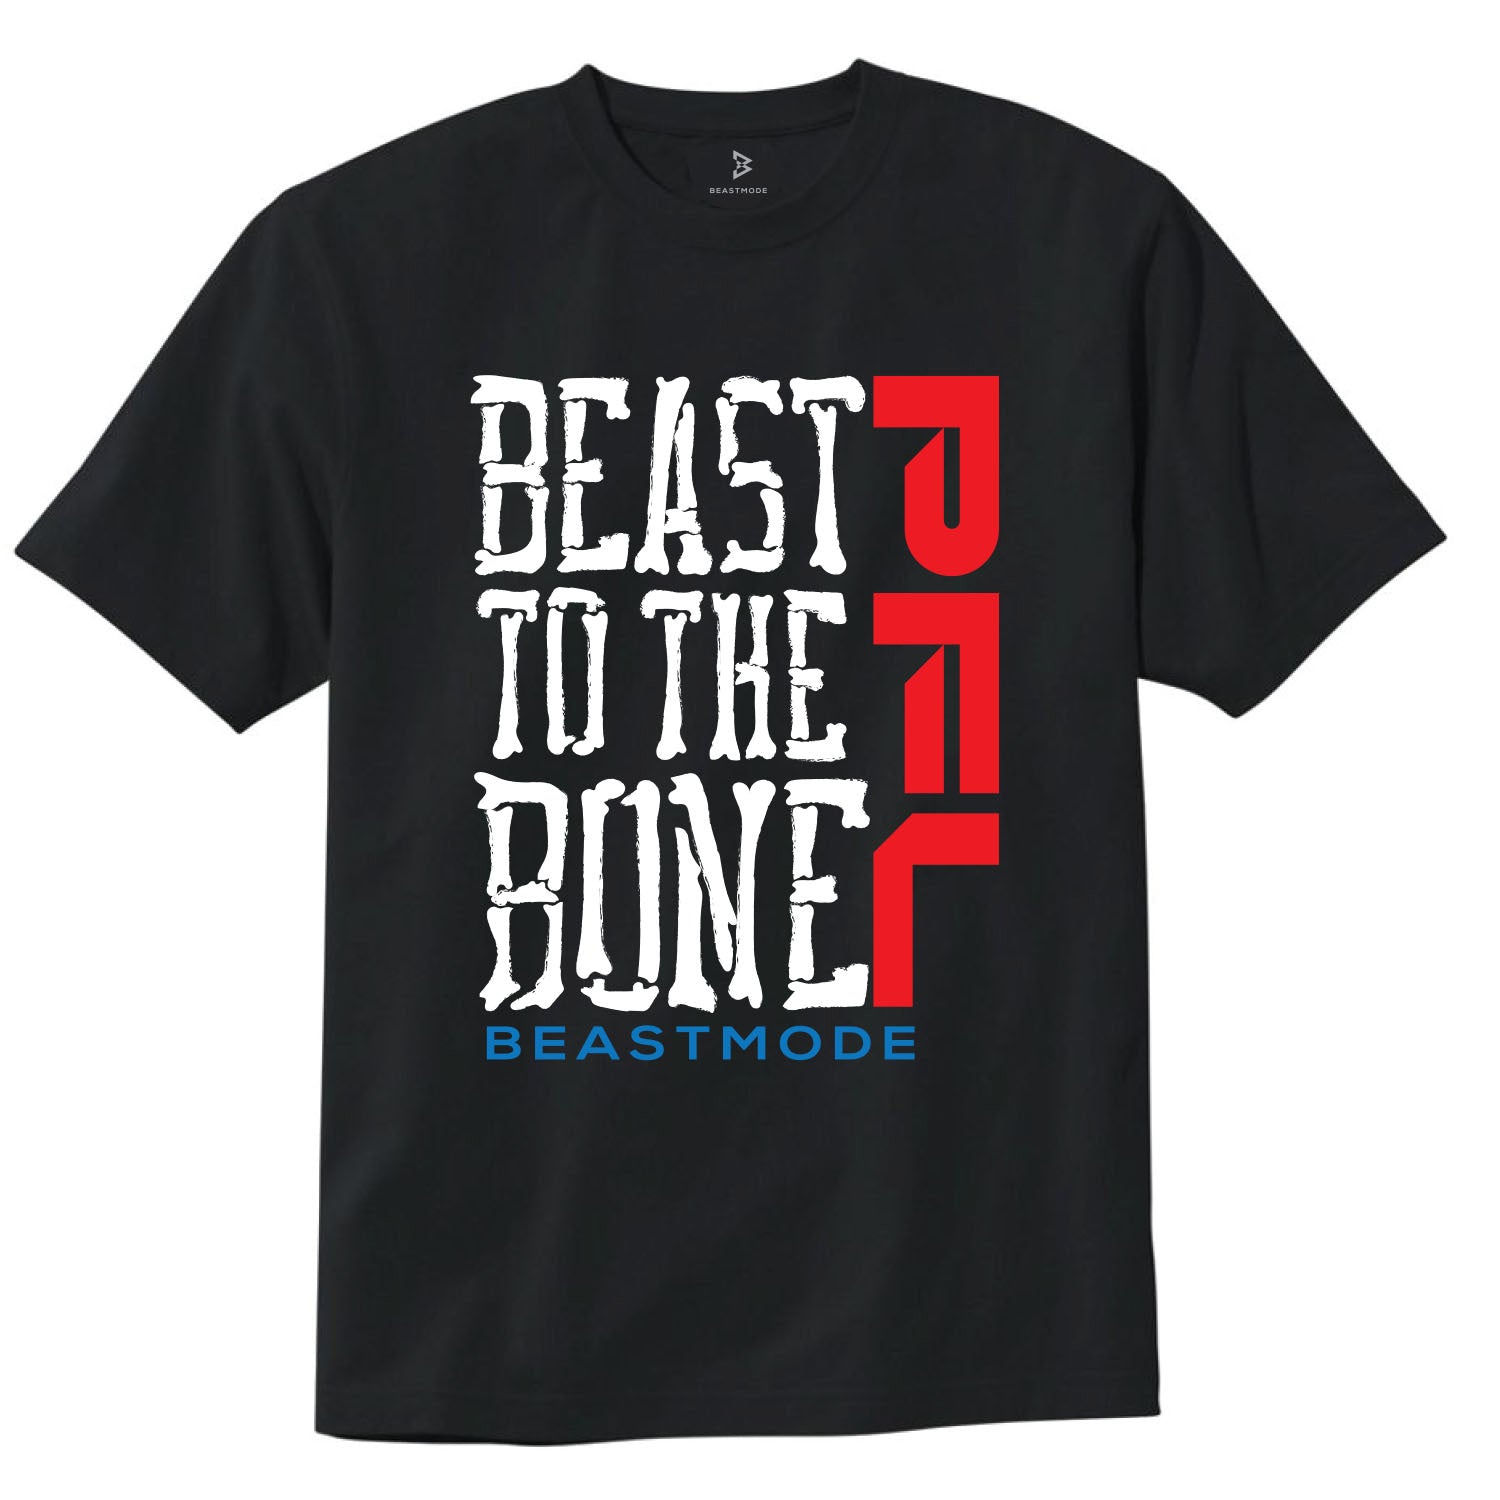 PFL x Beastmode "Beast To The Bone" T-Shirt in Black - Front View